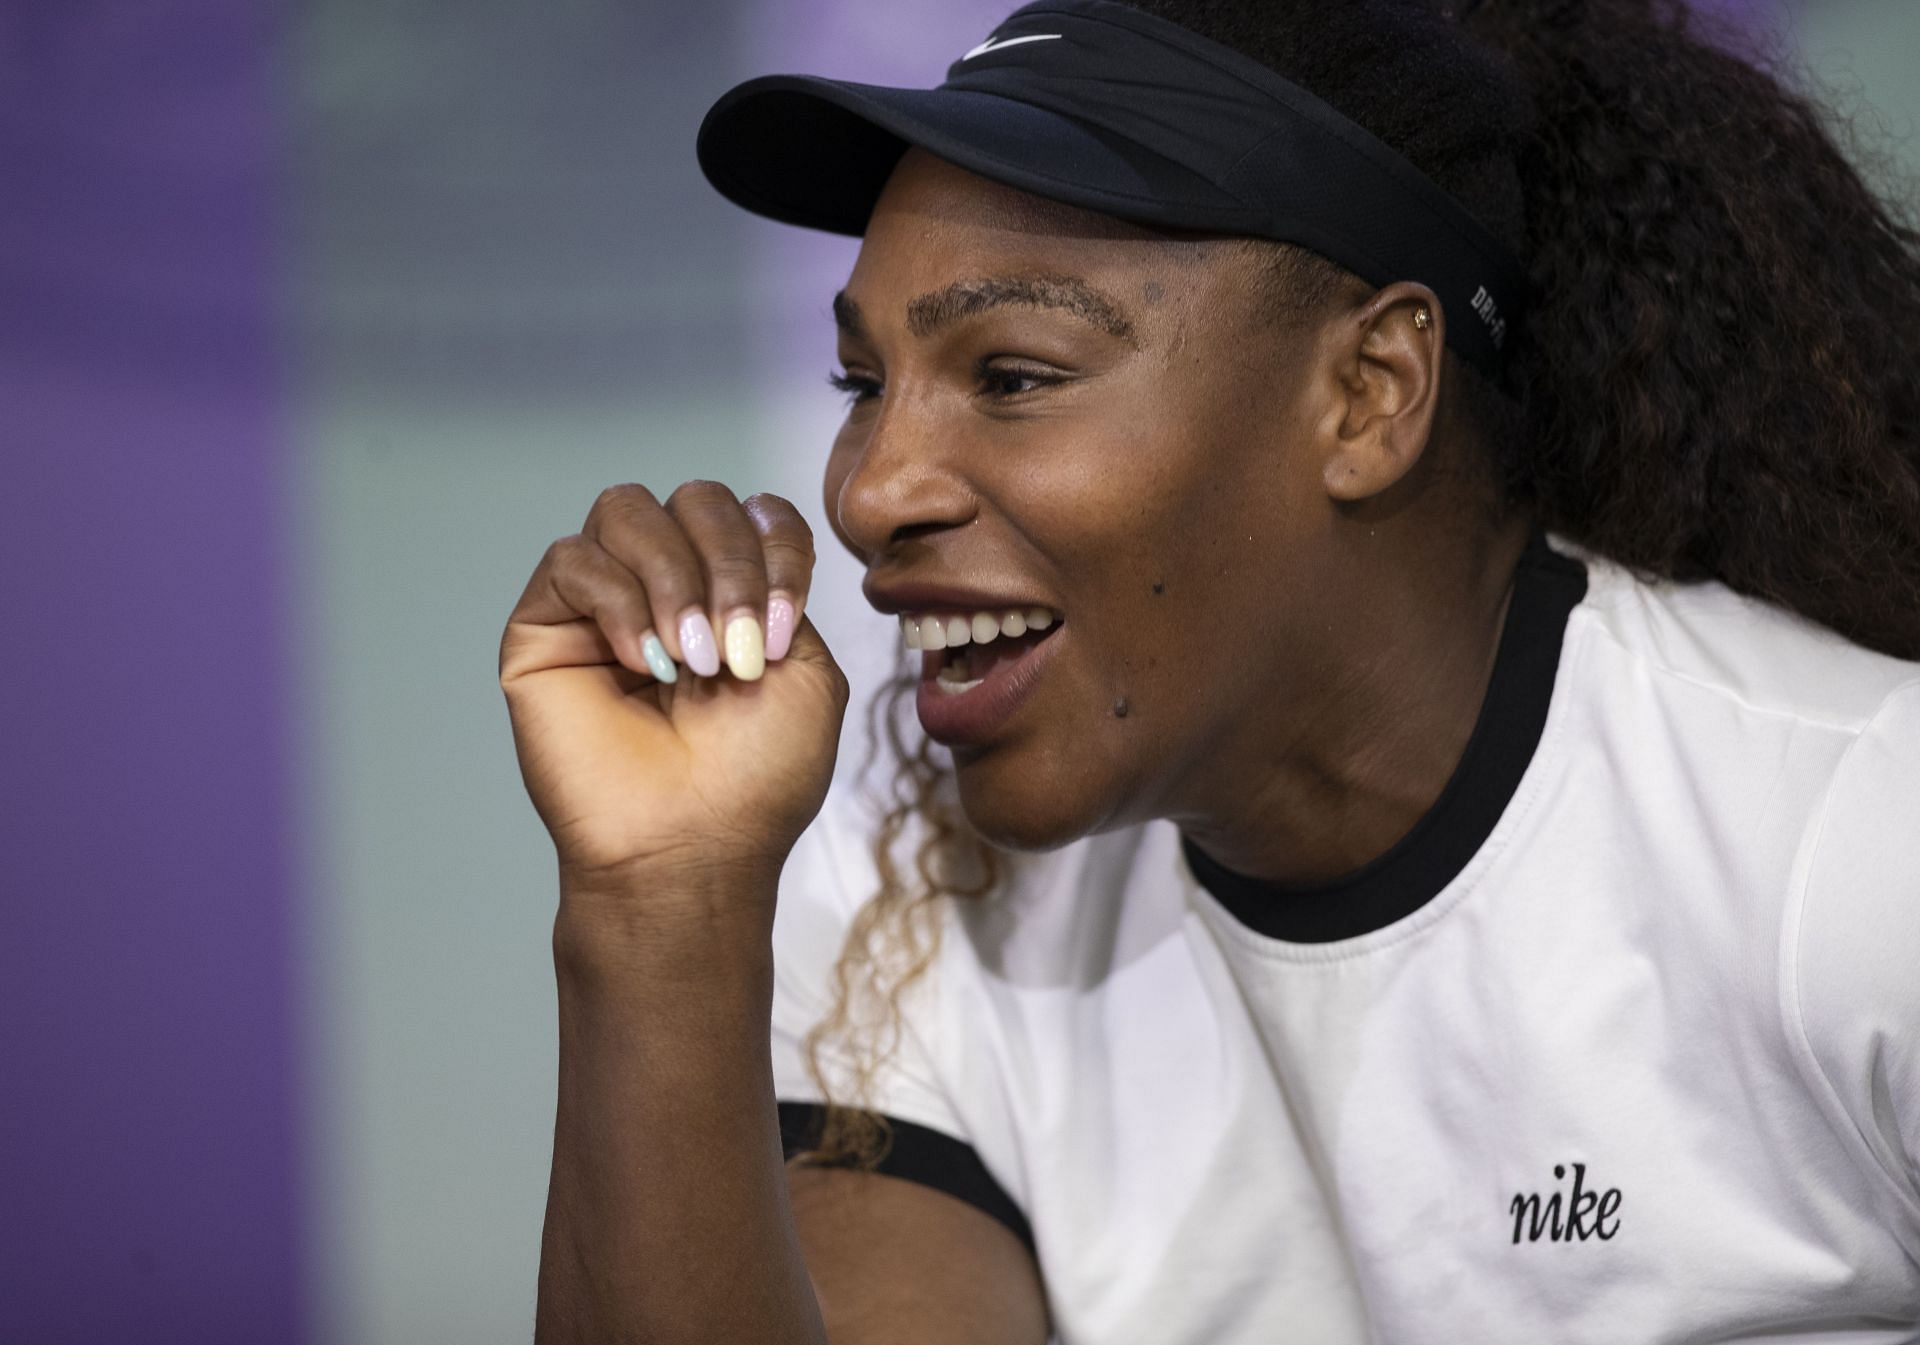 Serena Williams has a total of 23 Grand Slam titles to her name